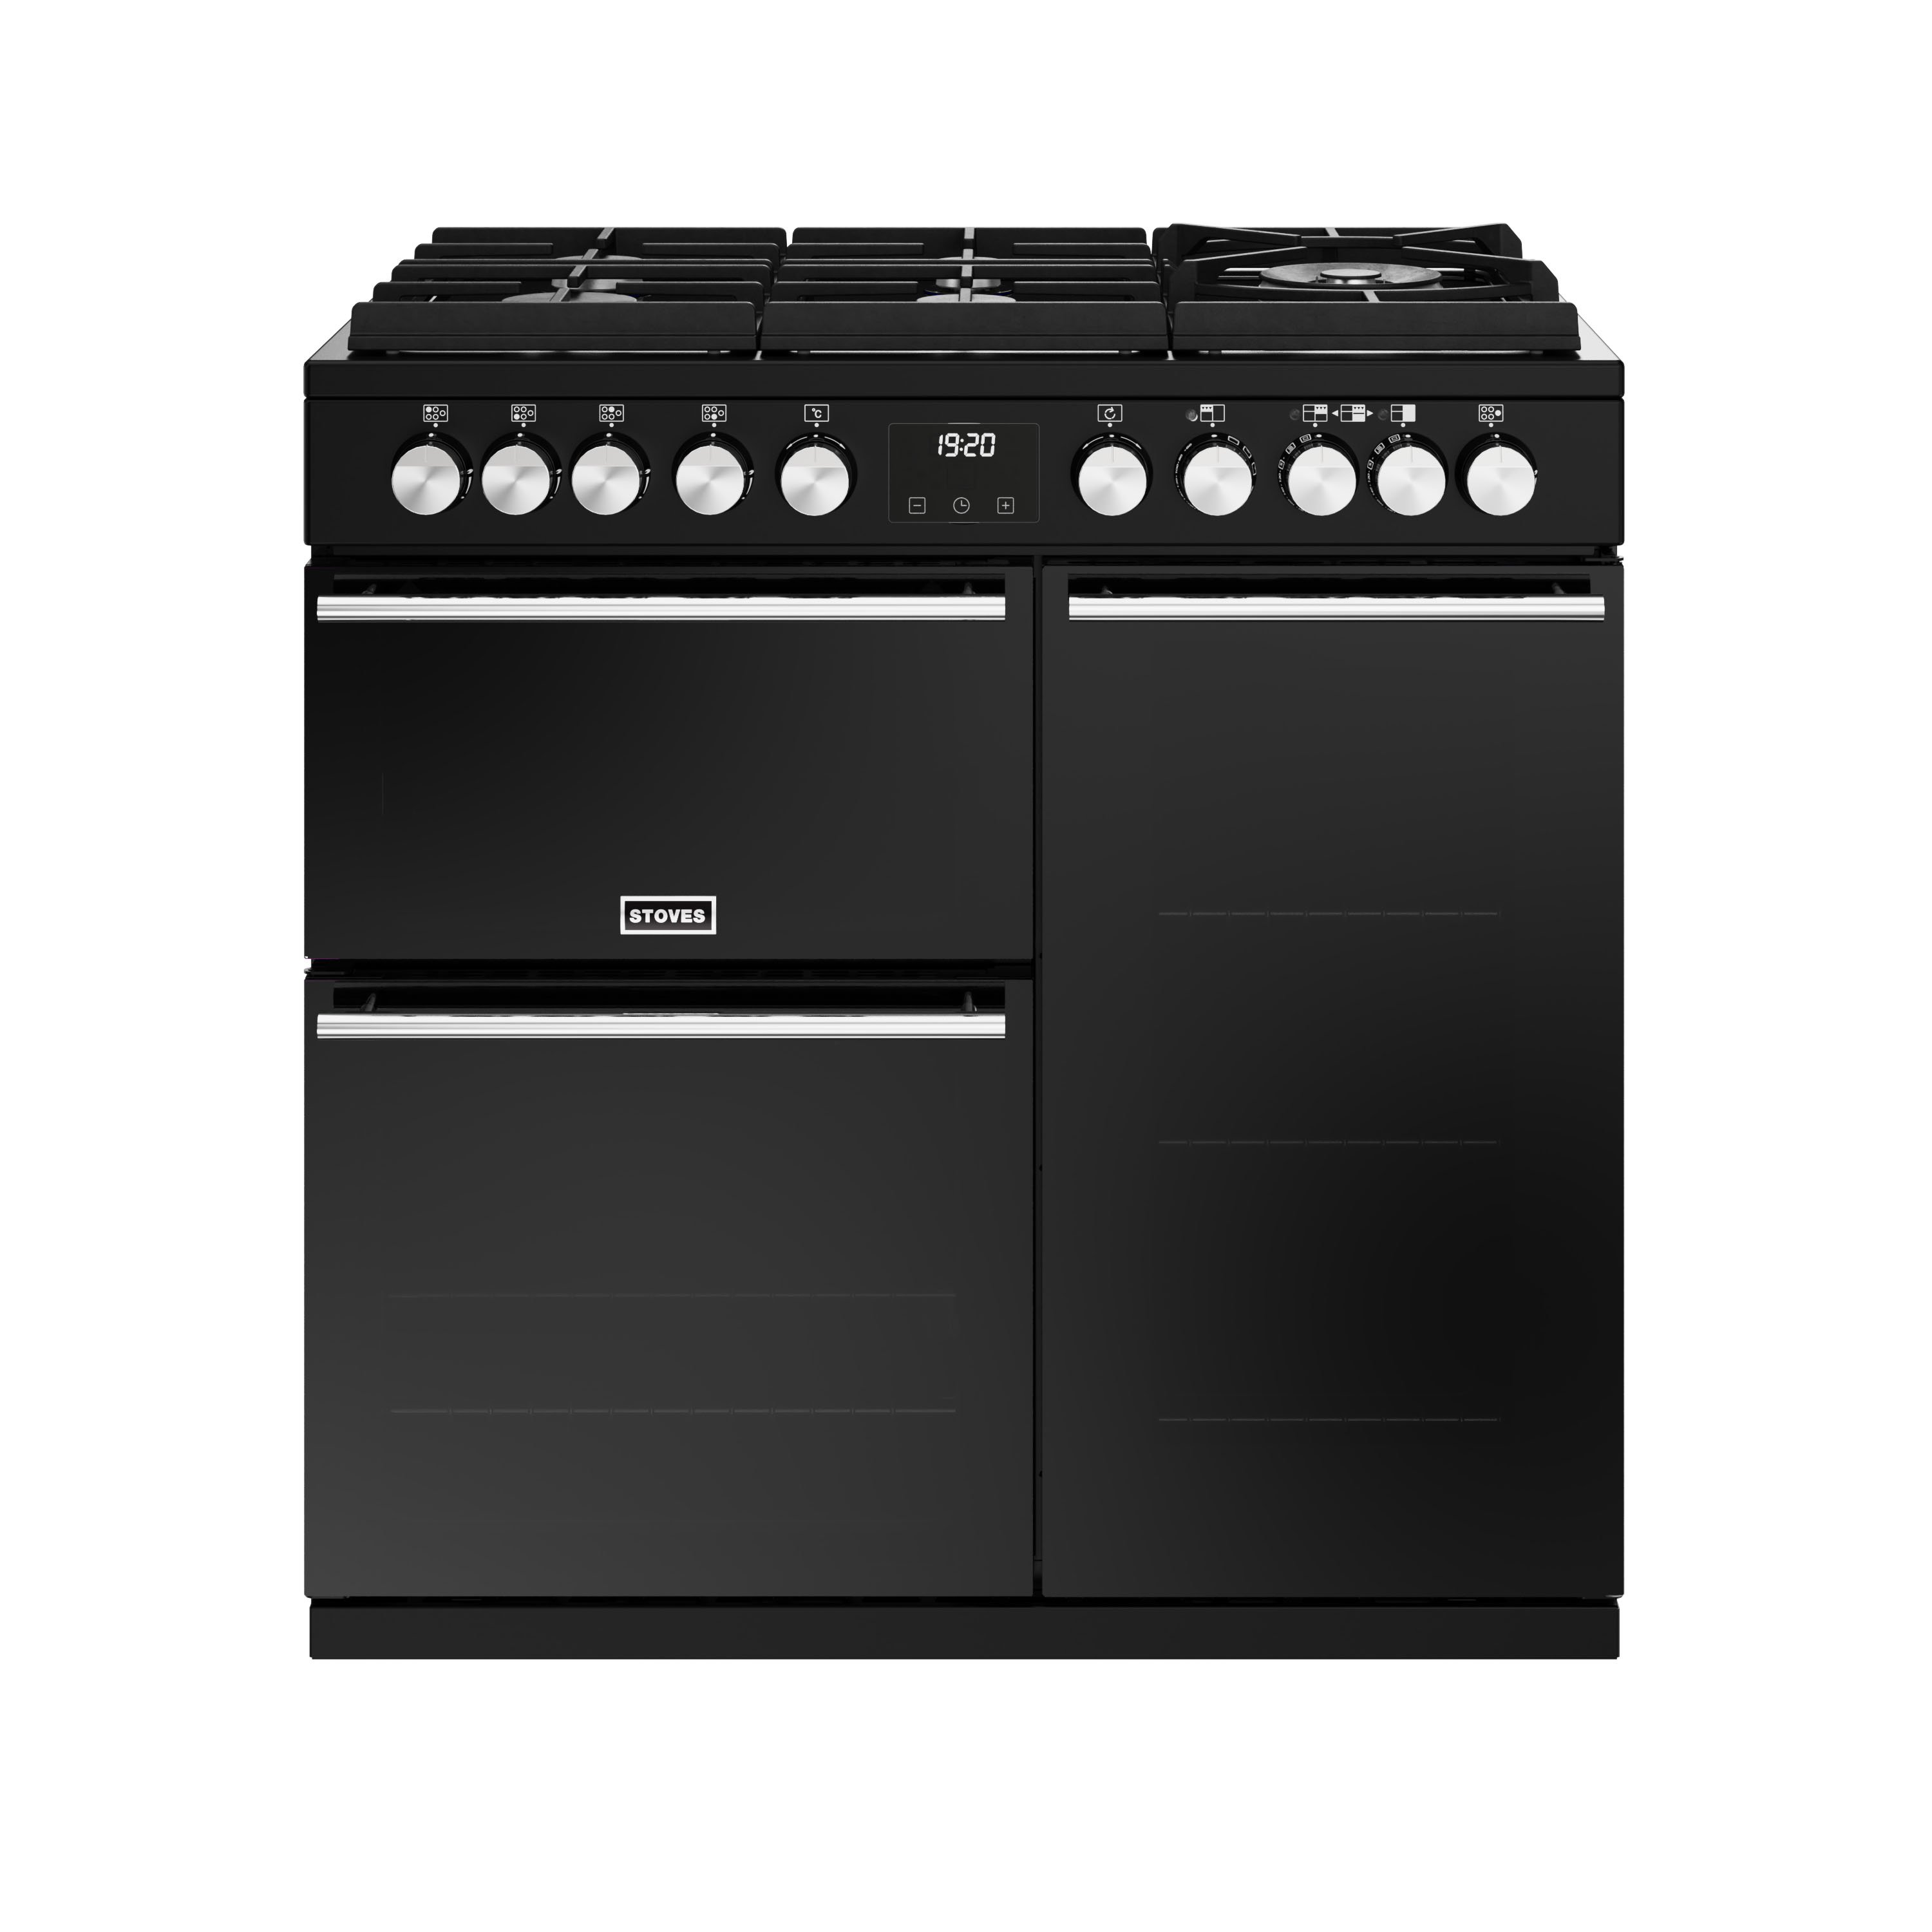 90cm dual fuel range cooker with a 5 burner Gas-Through-Glass hob, conventional oven & grill, multifunction main oven with TrueTemp digital thermostat, and tall fanned oven with PROFLEX™